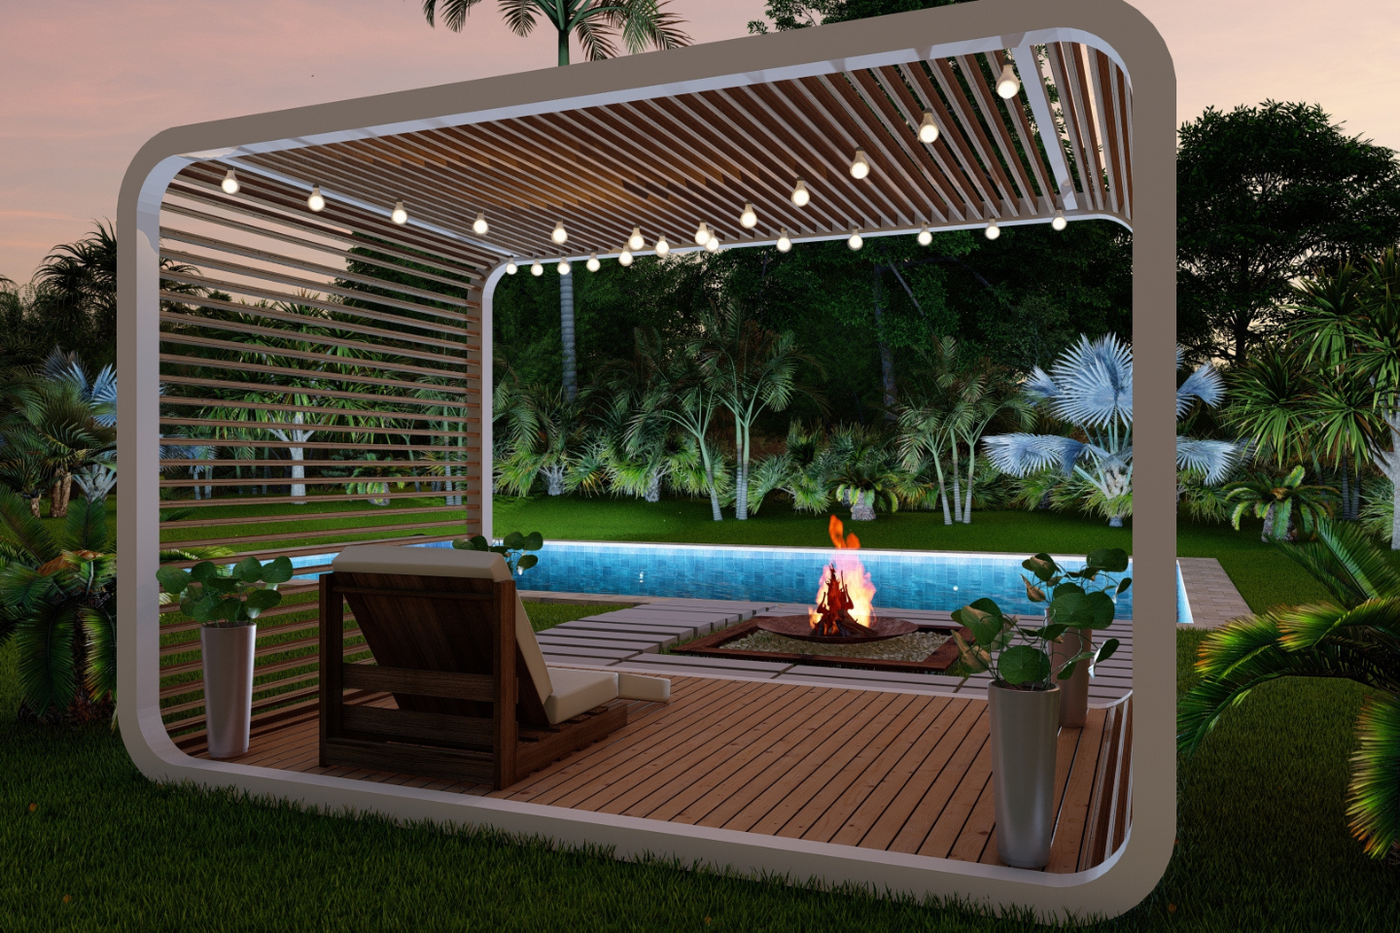 Deck accessory built by Spacee for your garden. Decorated with plants and a deck chair in front of a firepit with the pool in the background.